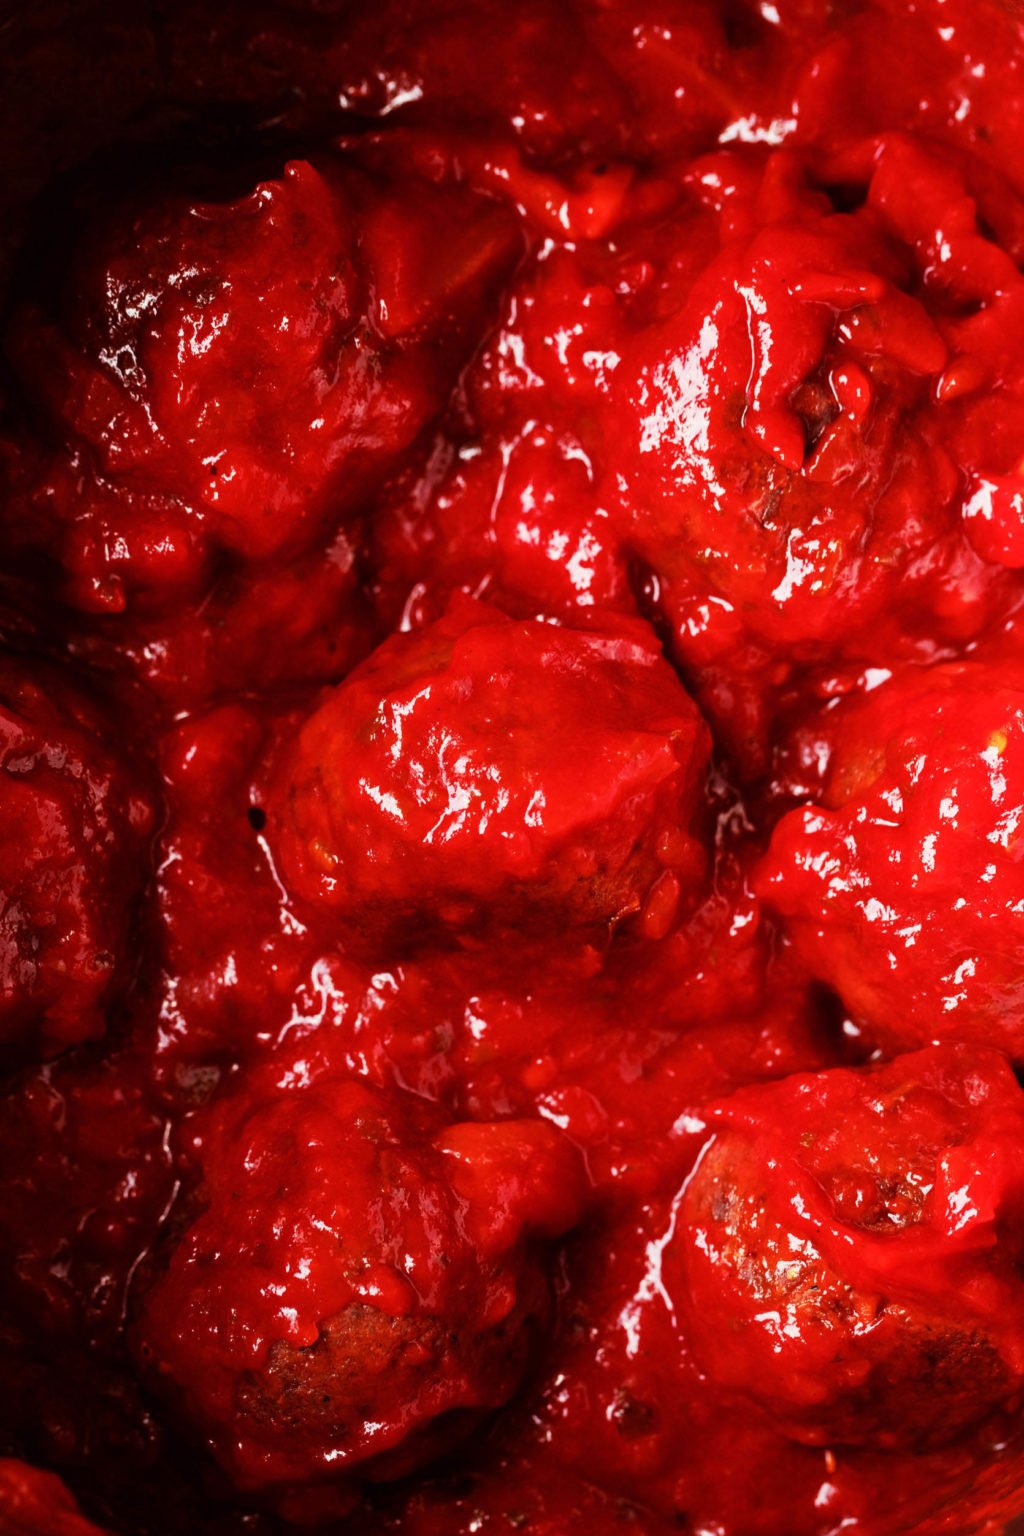 A batch of bright red marinara sauce, which is being used to simmer plant-based ingredients for pasta.